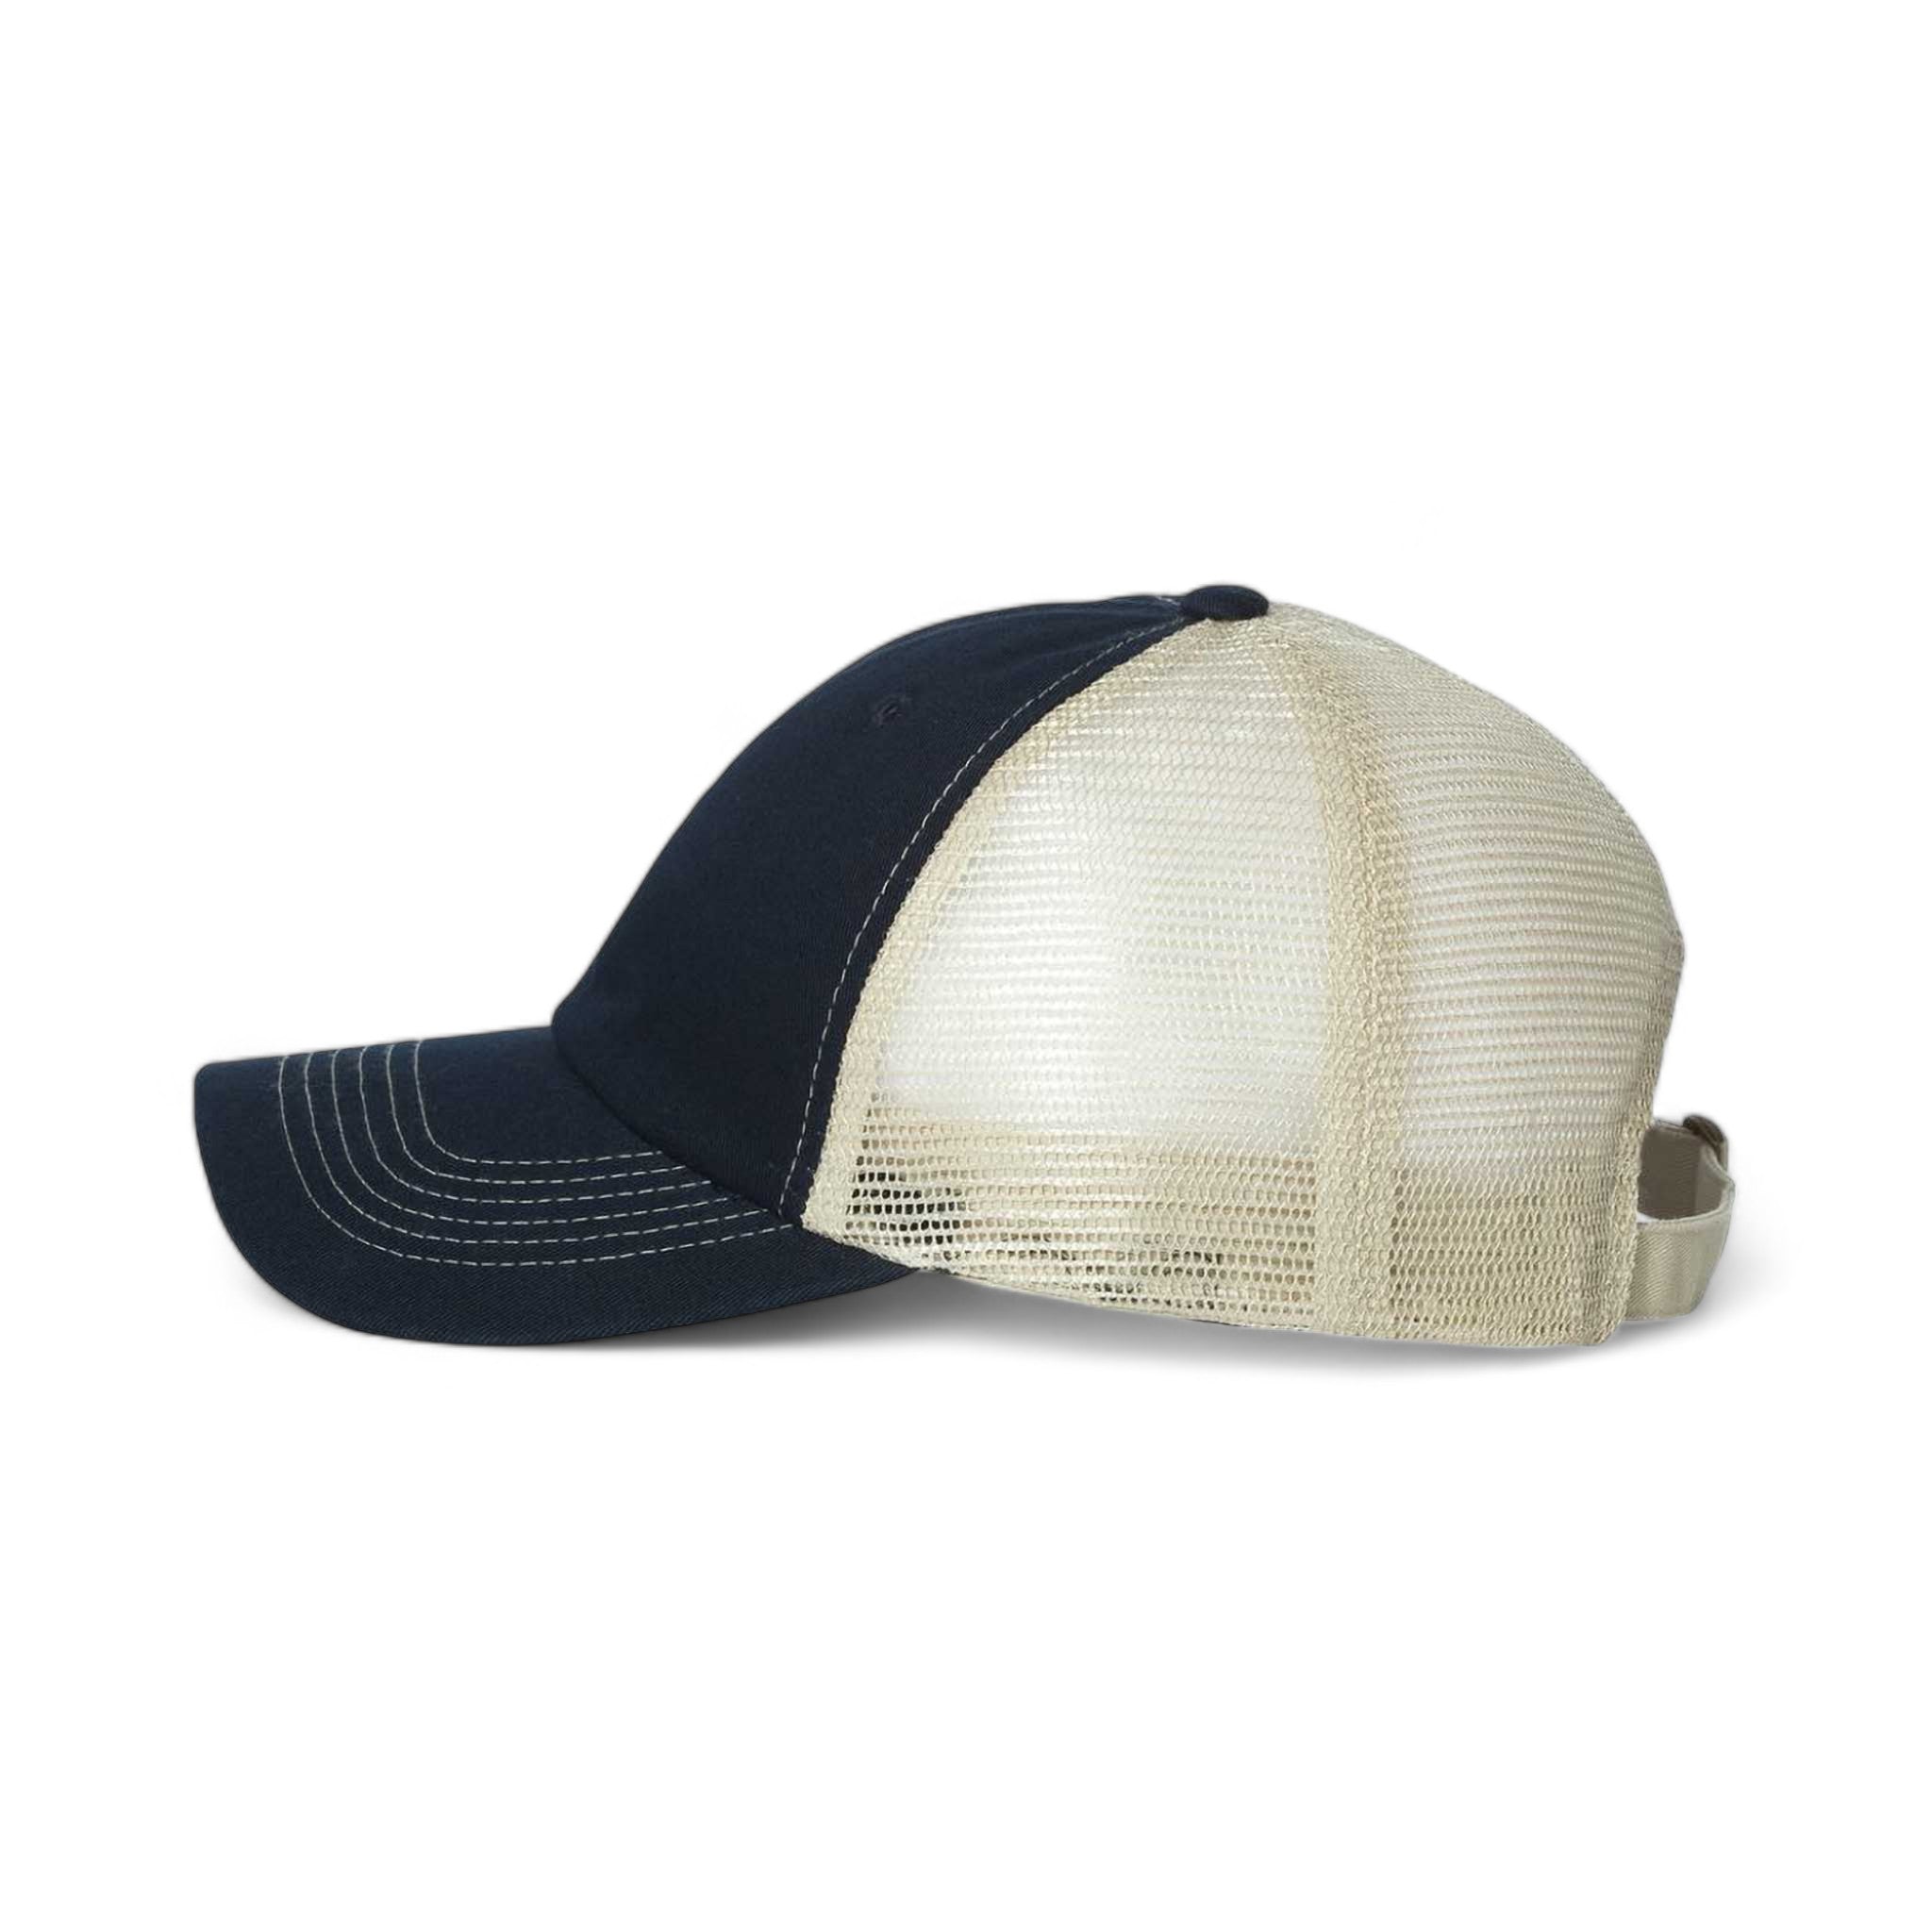 Side view of Sportsman 3100 custom hat in navy and stone